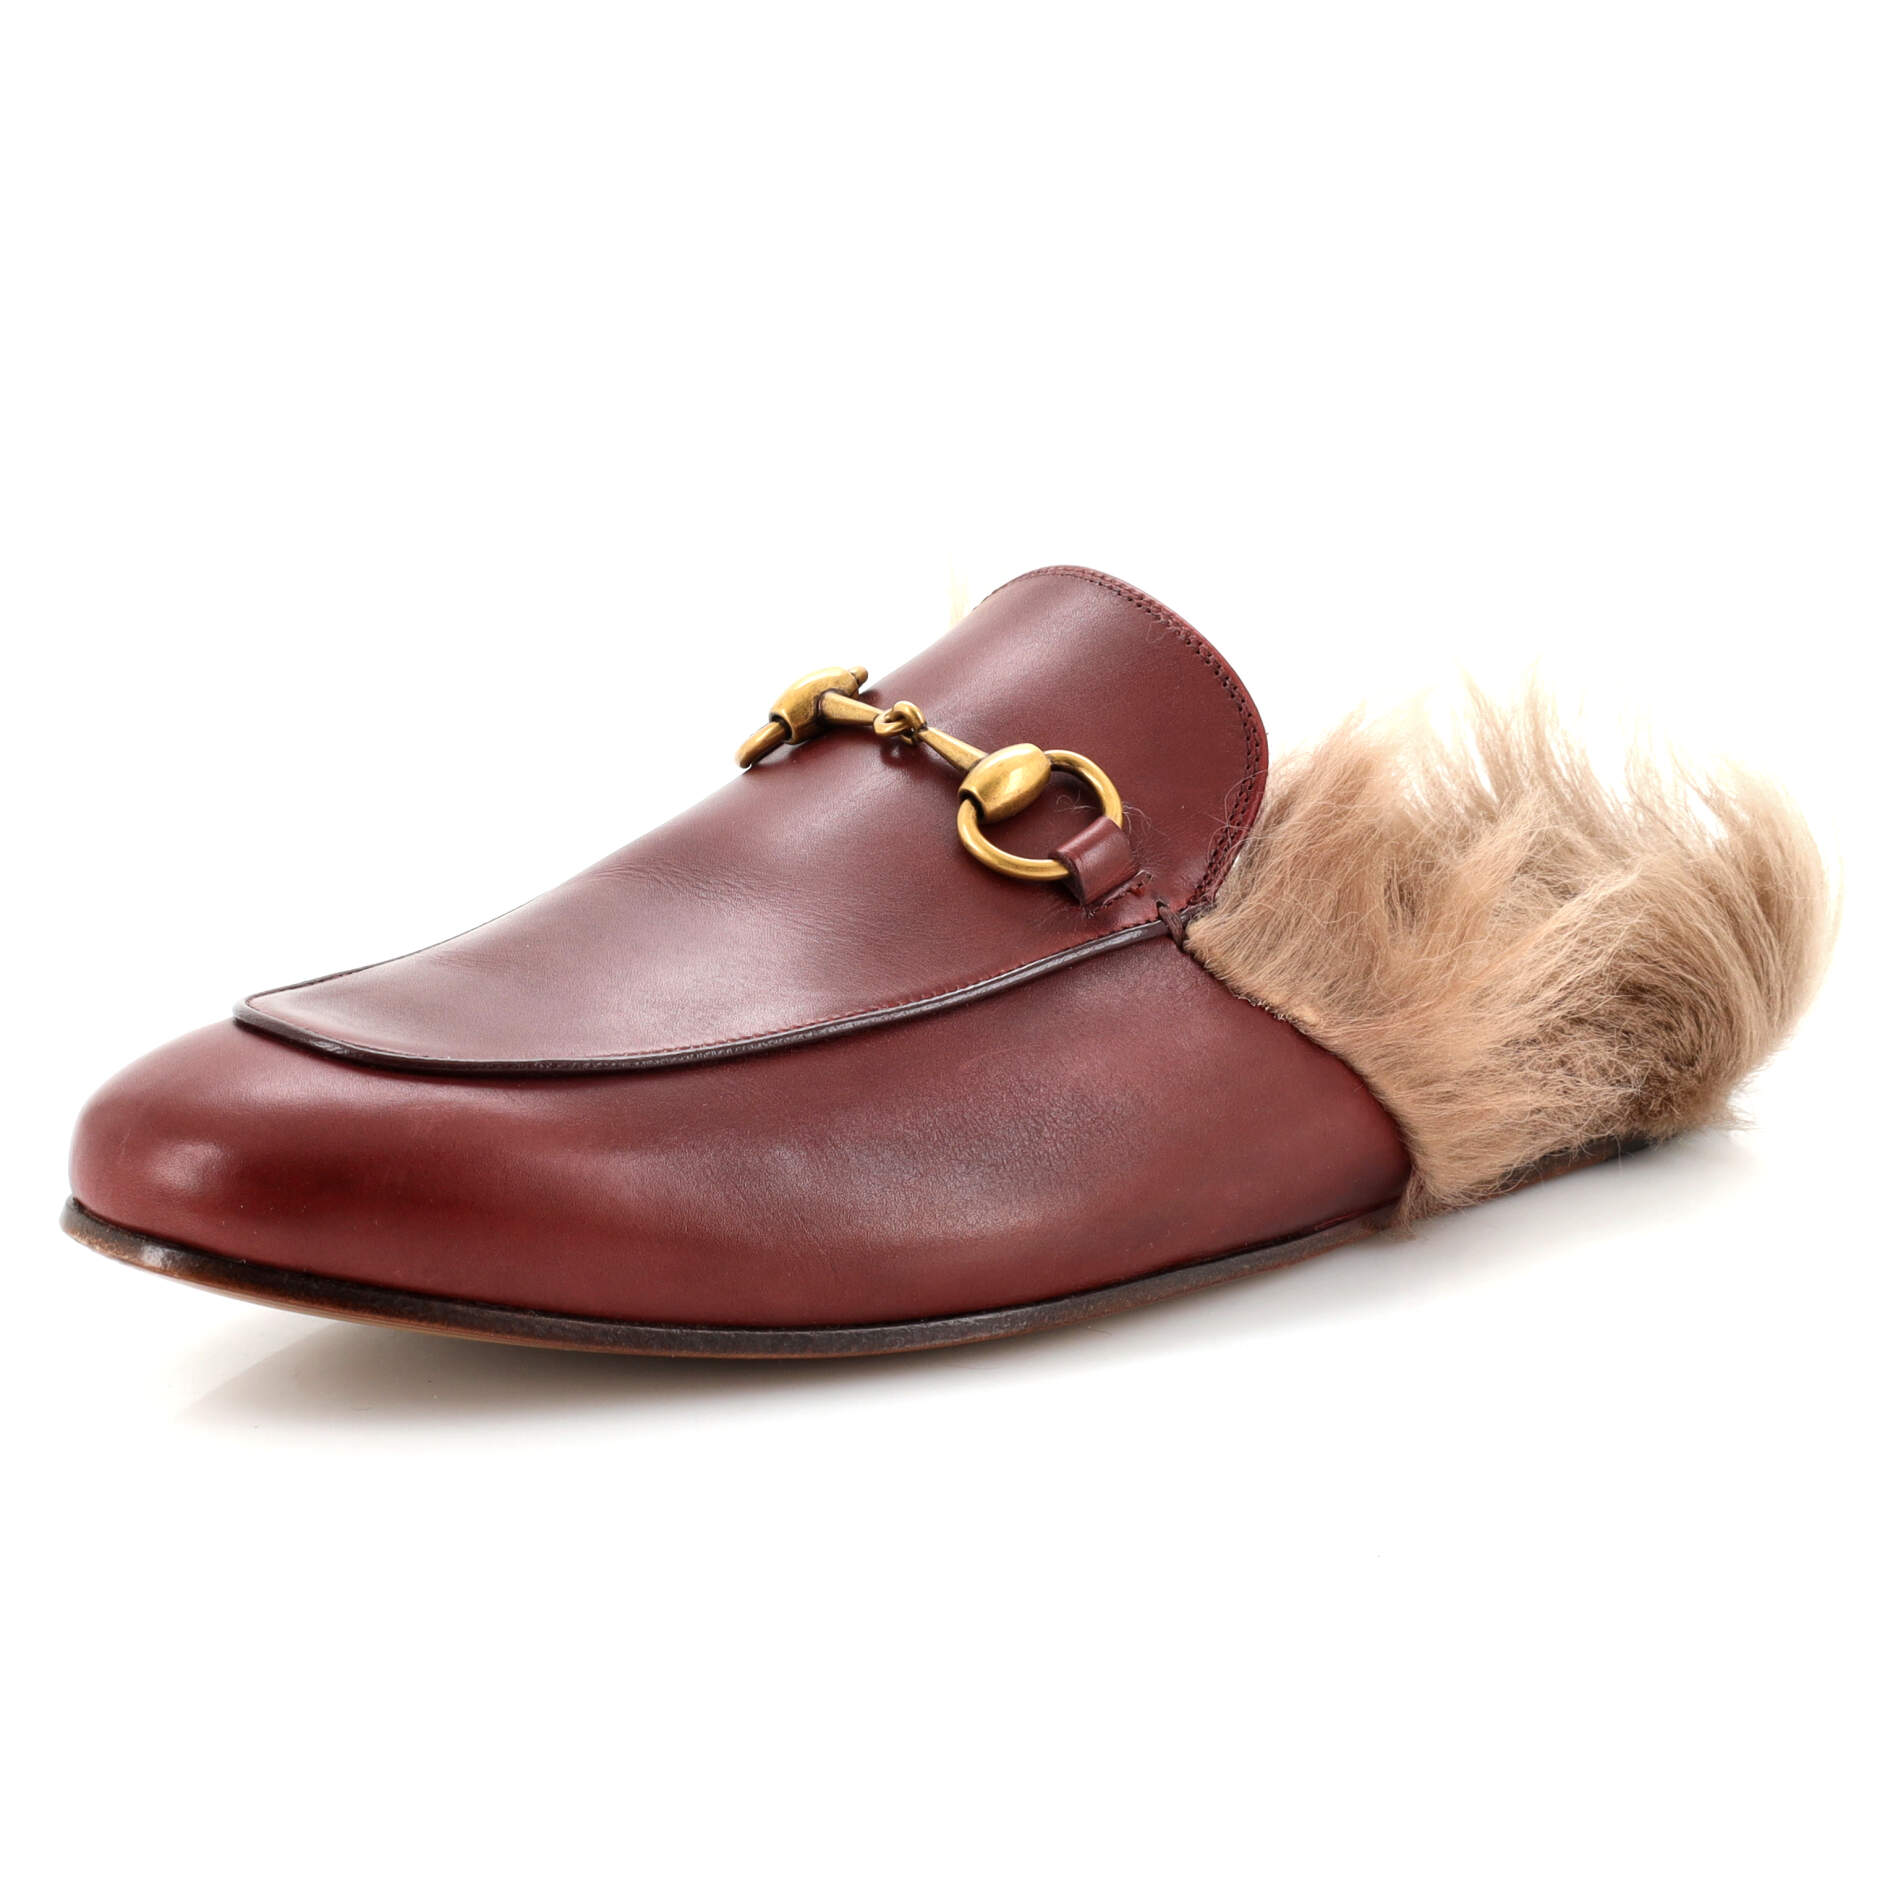 Men's Princetown Mules Leather with Fur